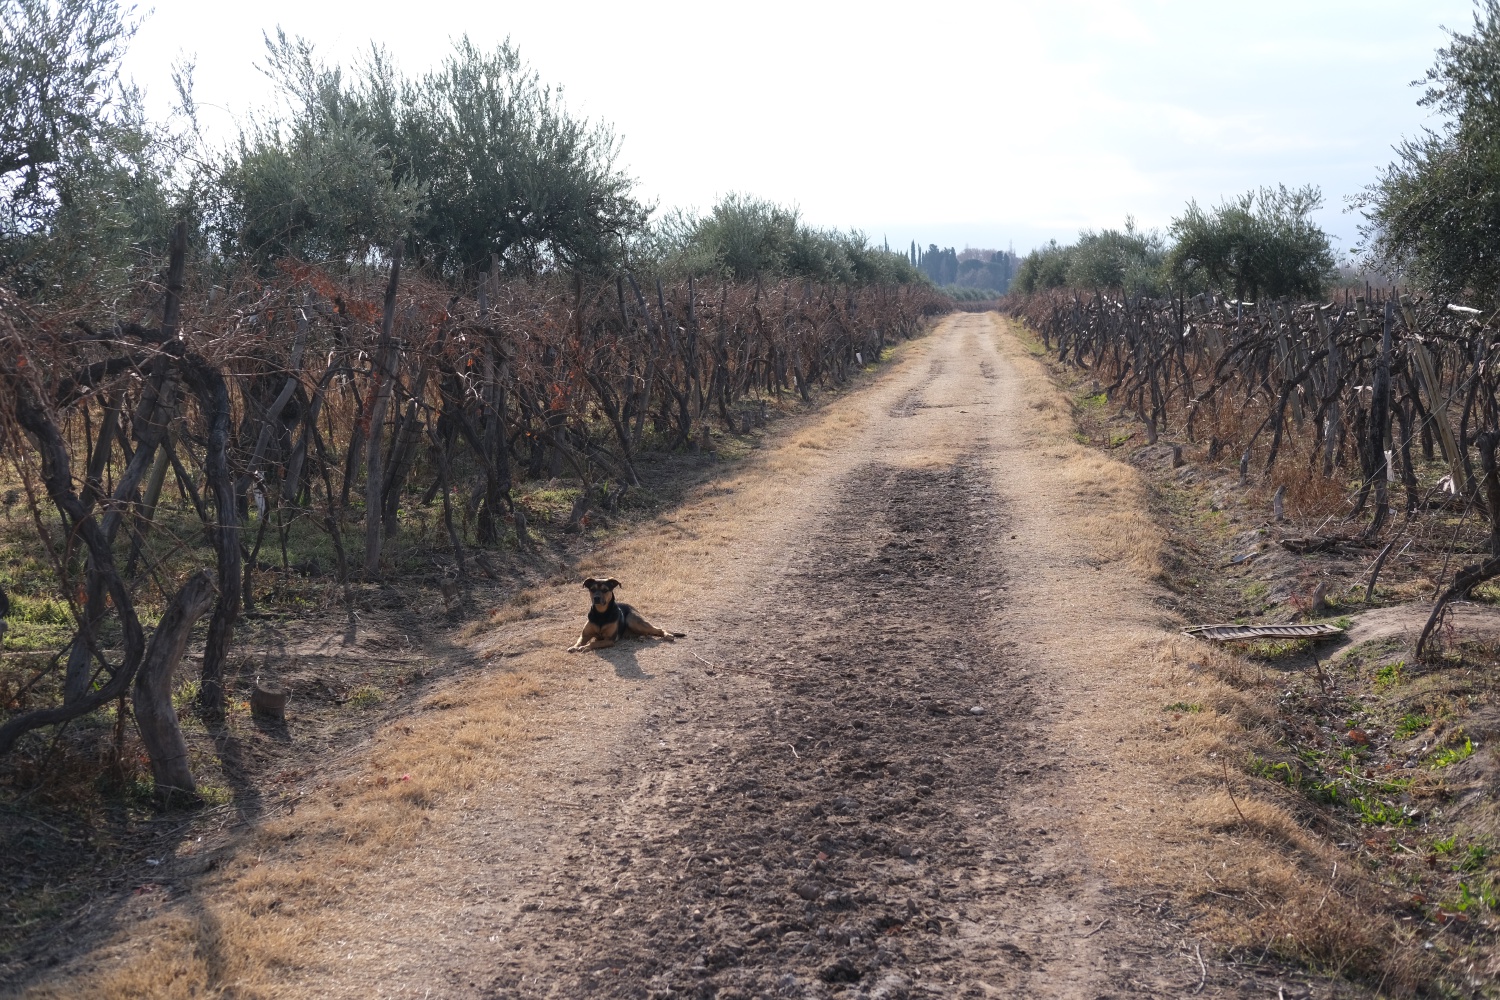 It's winter now in Argentina hence the already pruned Malbec vines... Perro on watch...